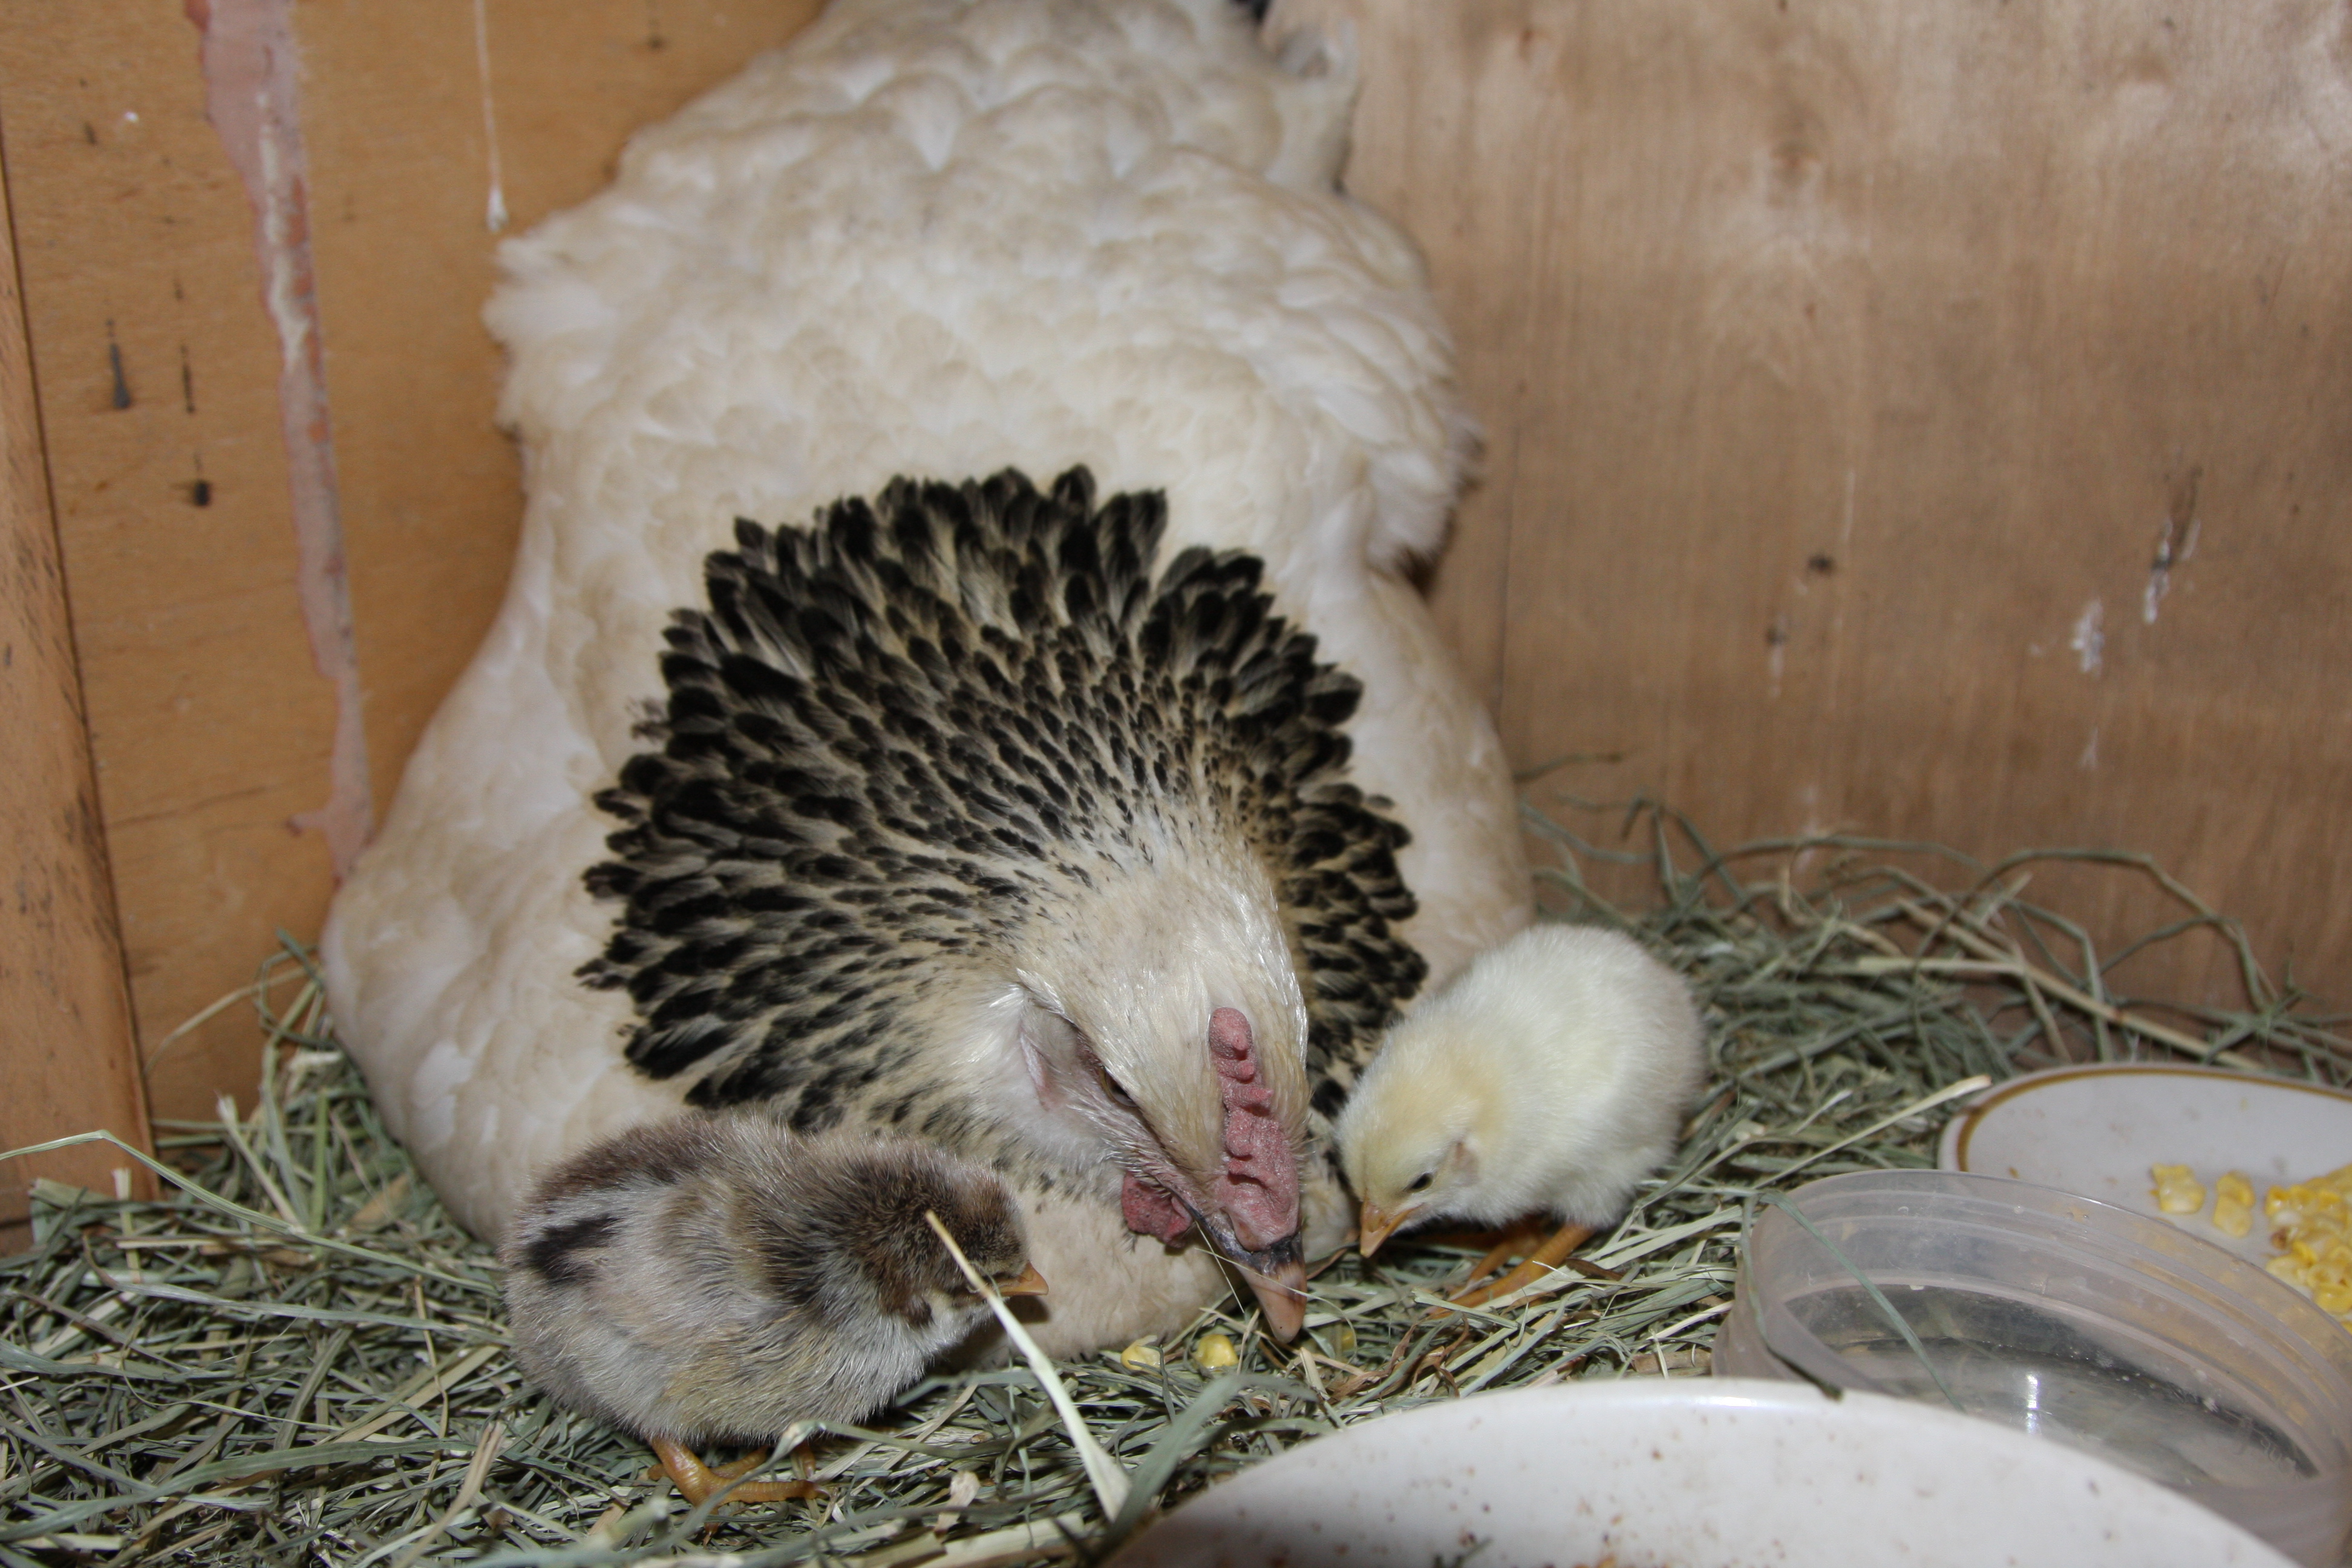 Bianca and her 2 baby chicks.